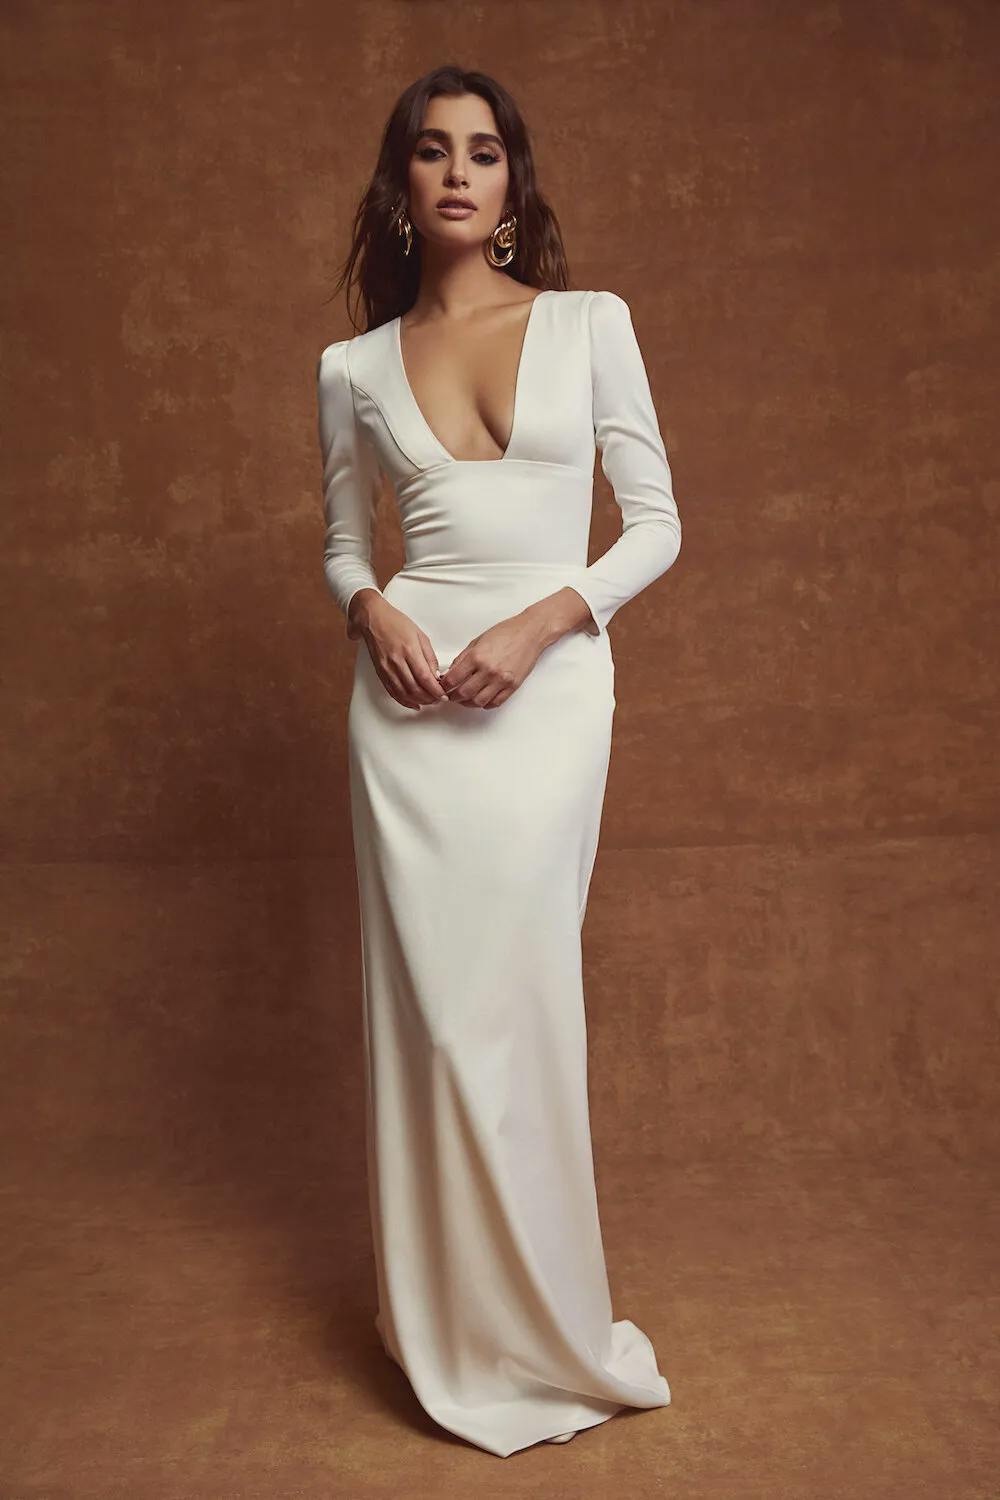 A woman stands confidently against a brown textured backdrop, wearing an elegant, long-sleeved, white evening gown with a deep V-neckline. Her dark hair is styled in loose waves, and she accessorizes with large, statement earrings.